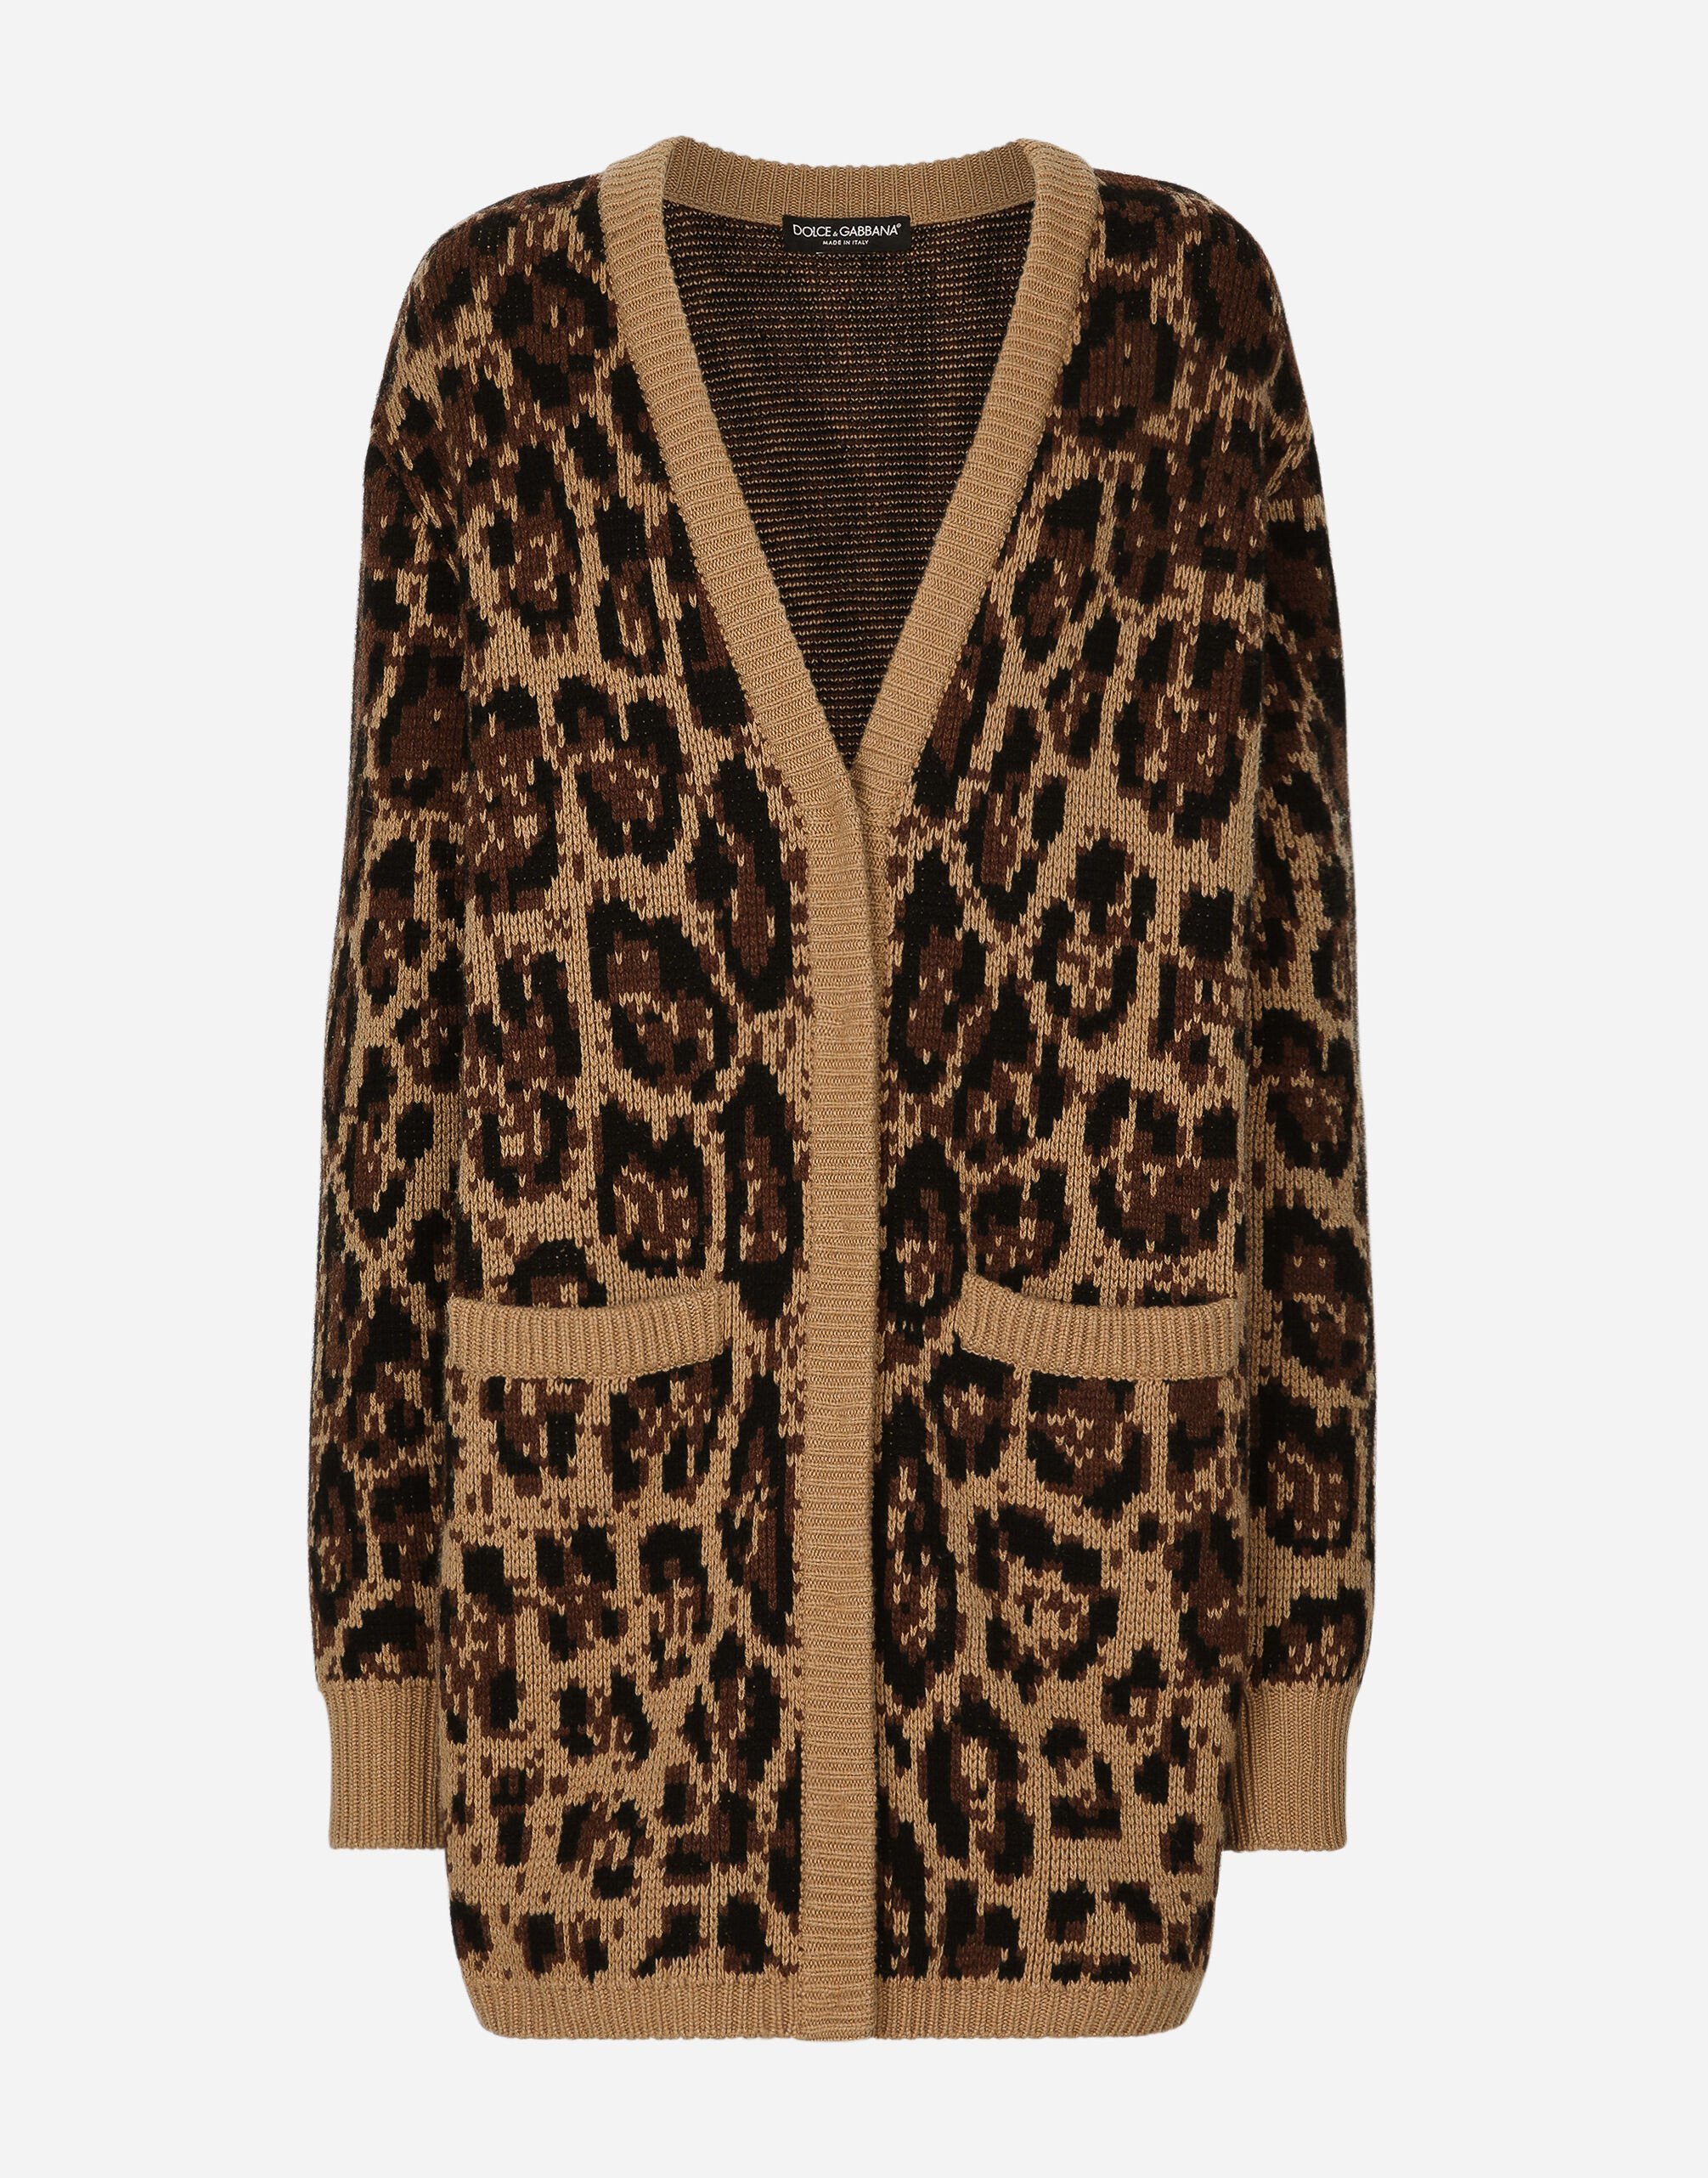 Dolce & Gabbana Long wool and cashmere cardigan with jacquard leopard design Animal Print BB7116AM568